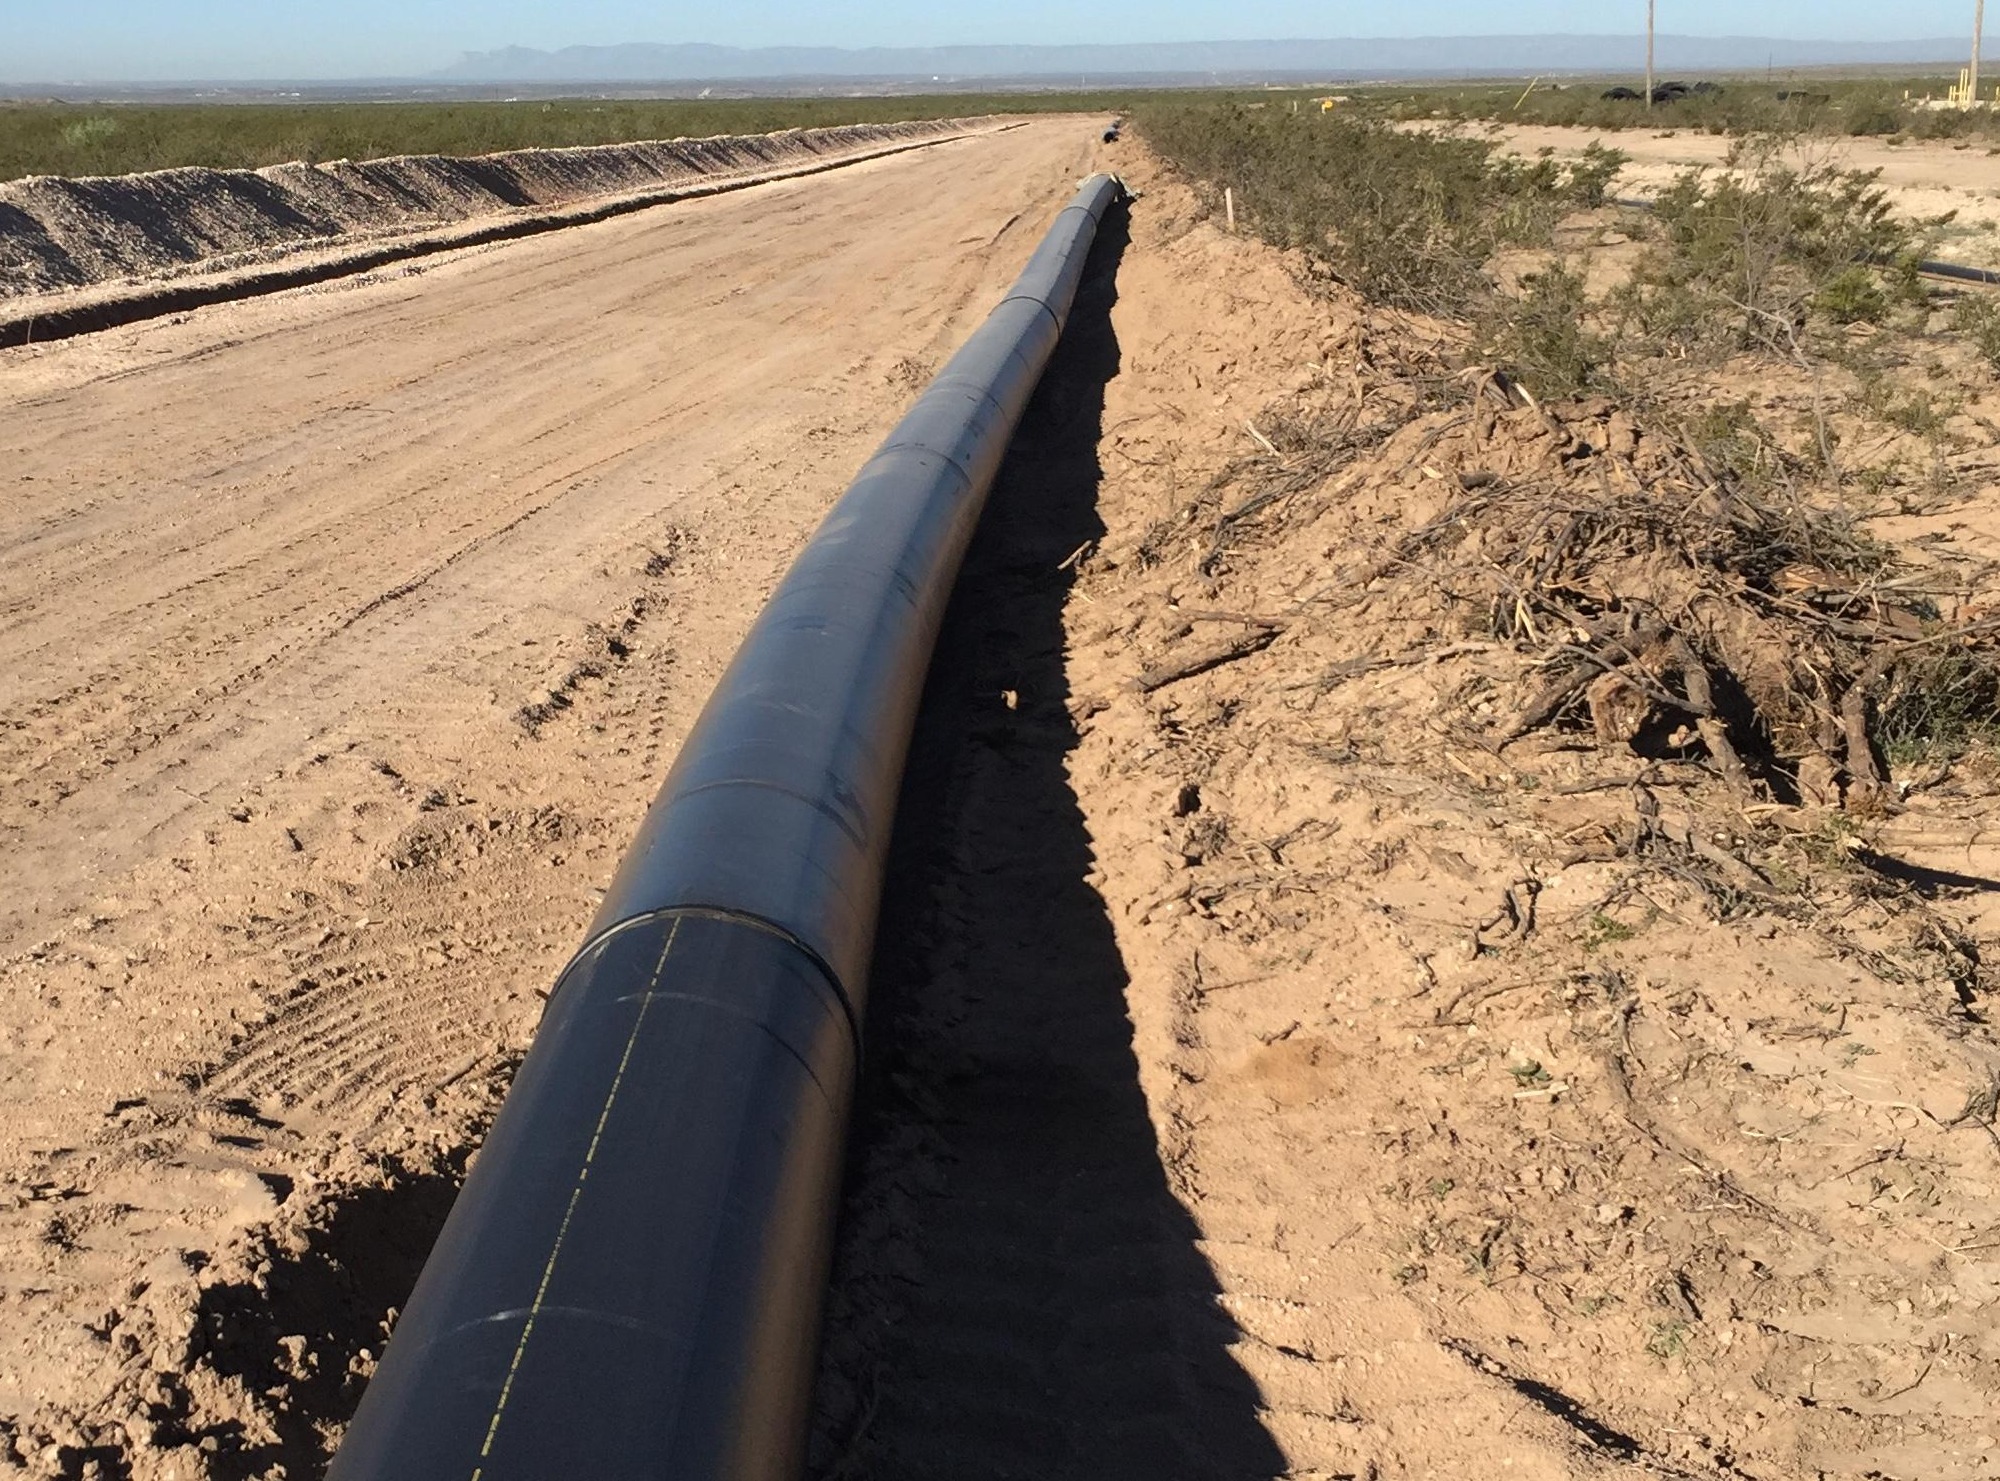 Benefits of HDPE Pipe in Oil & Gas and Mining Operations